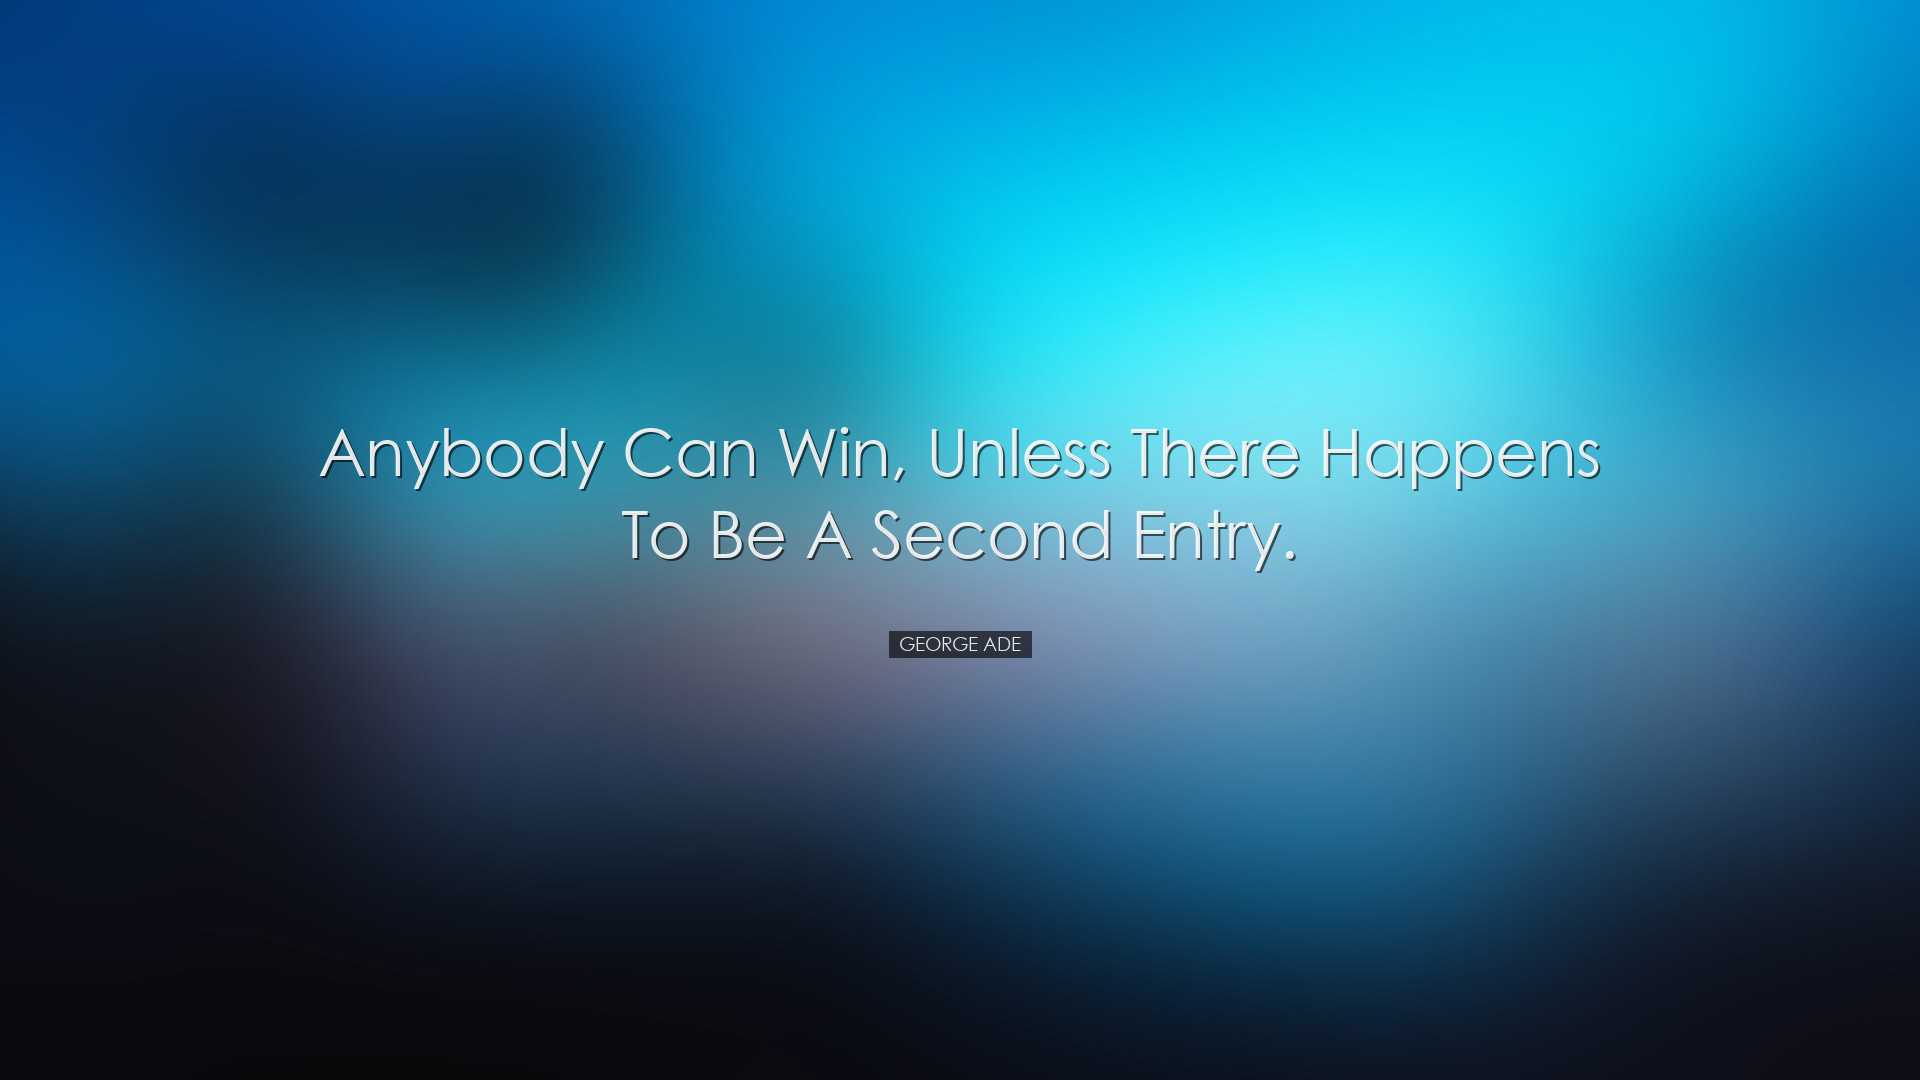 Anybody can win, unless there happens to be a second entry. - Geor